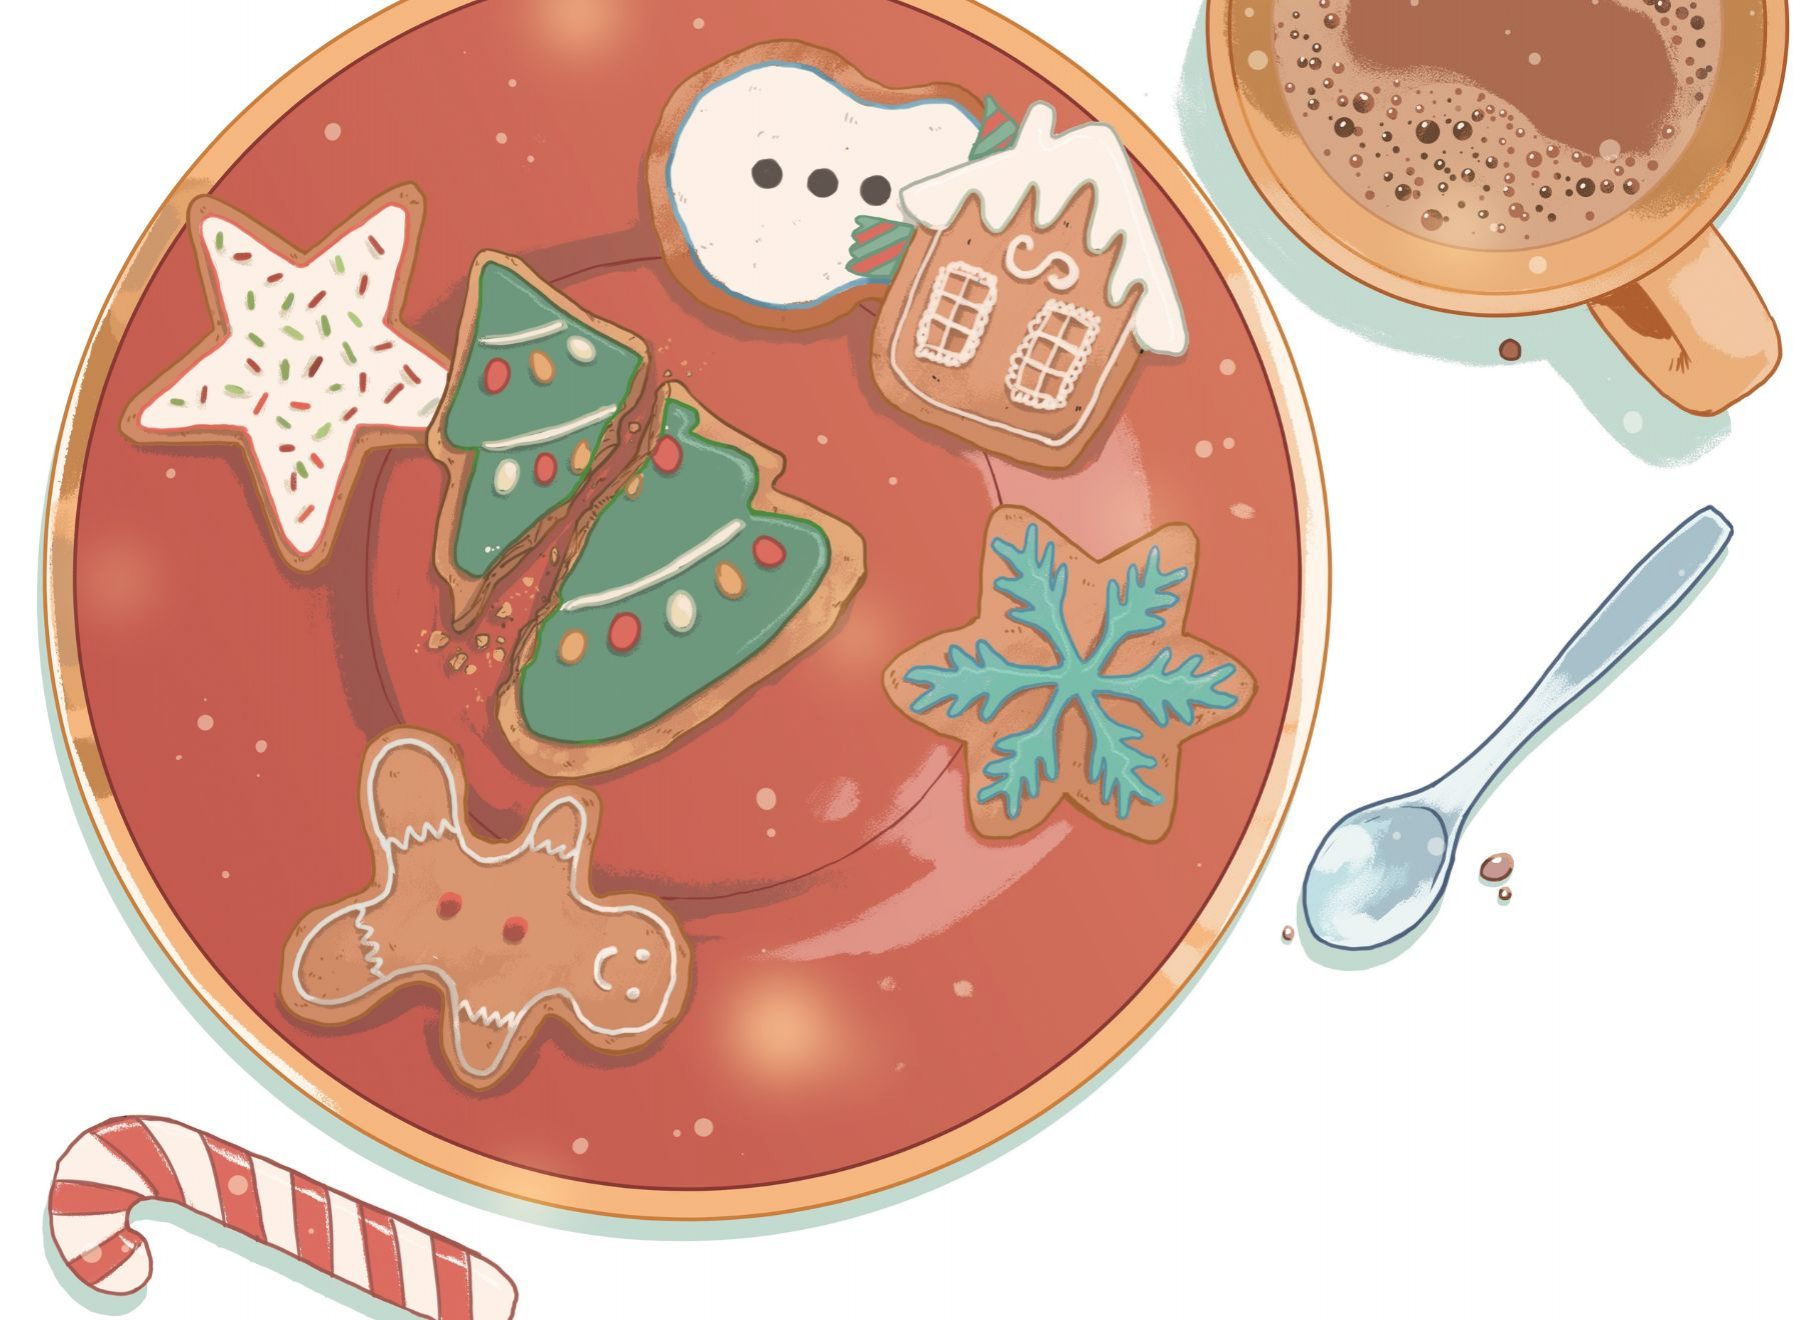 illustration shows Christmas cookies on plate next to candy cane and hot chocolate